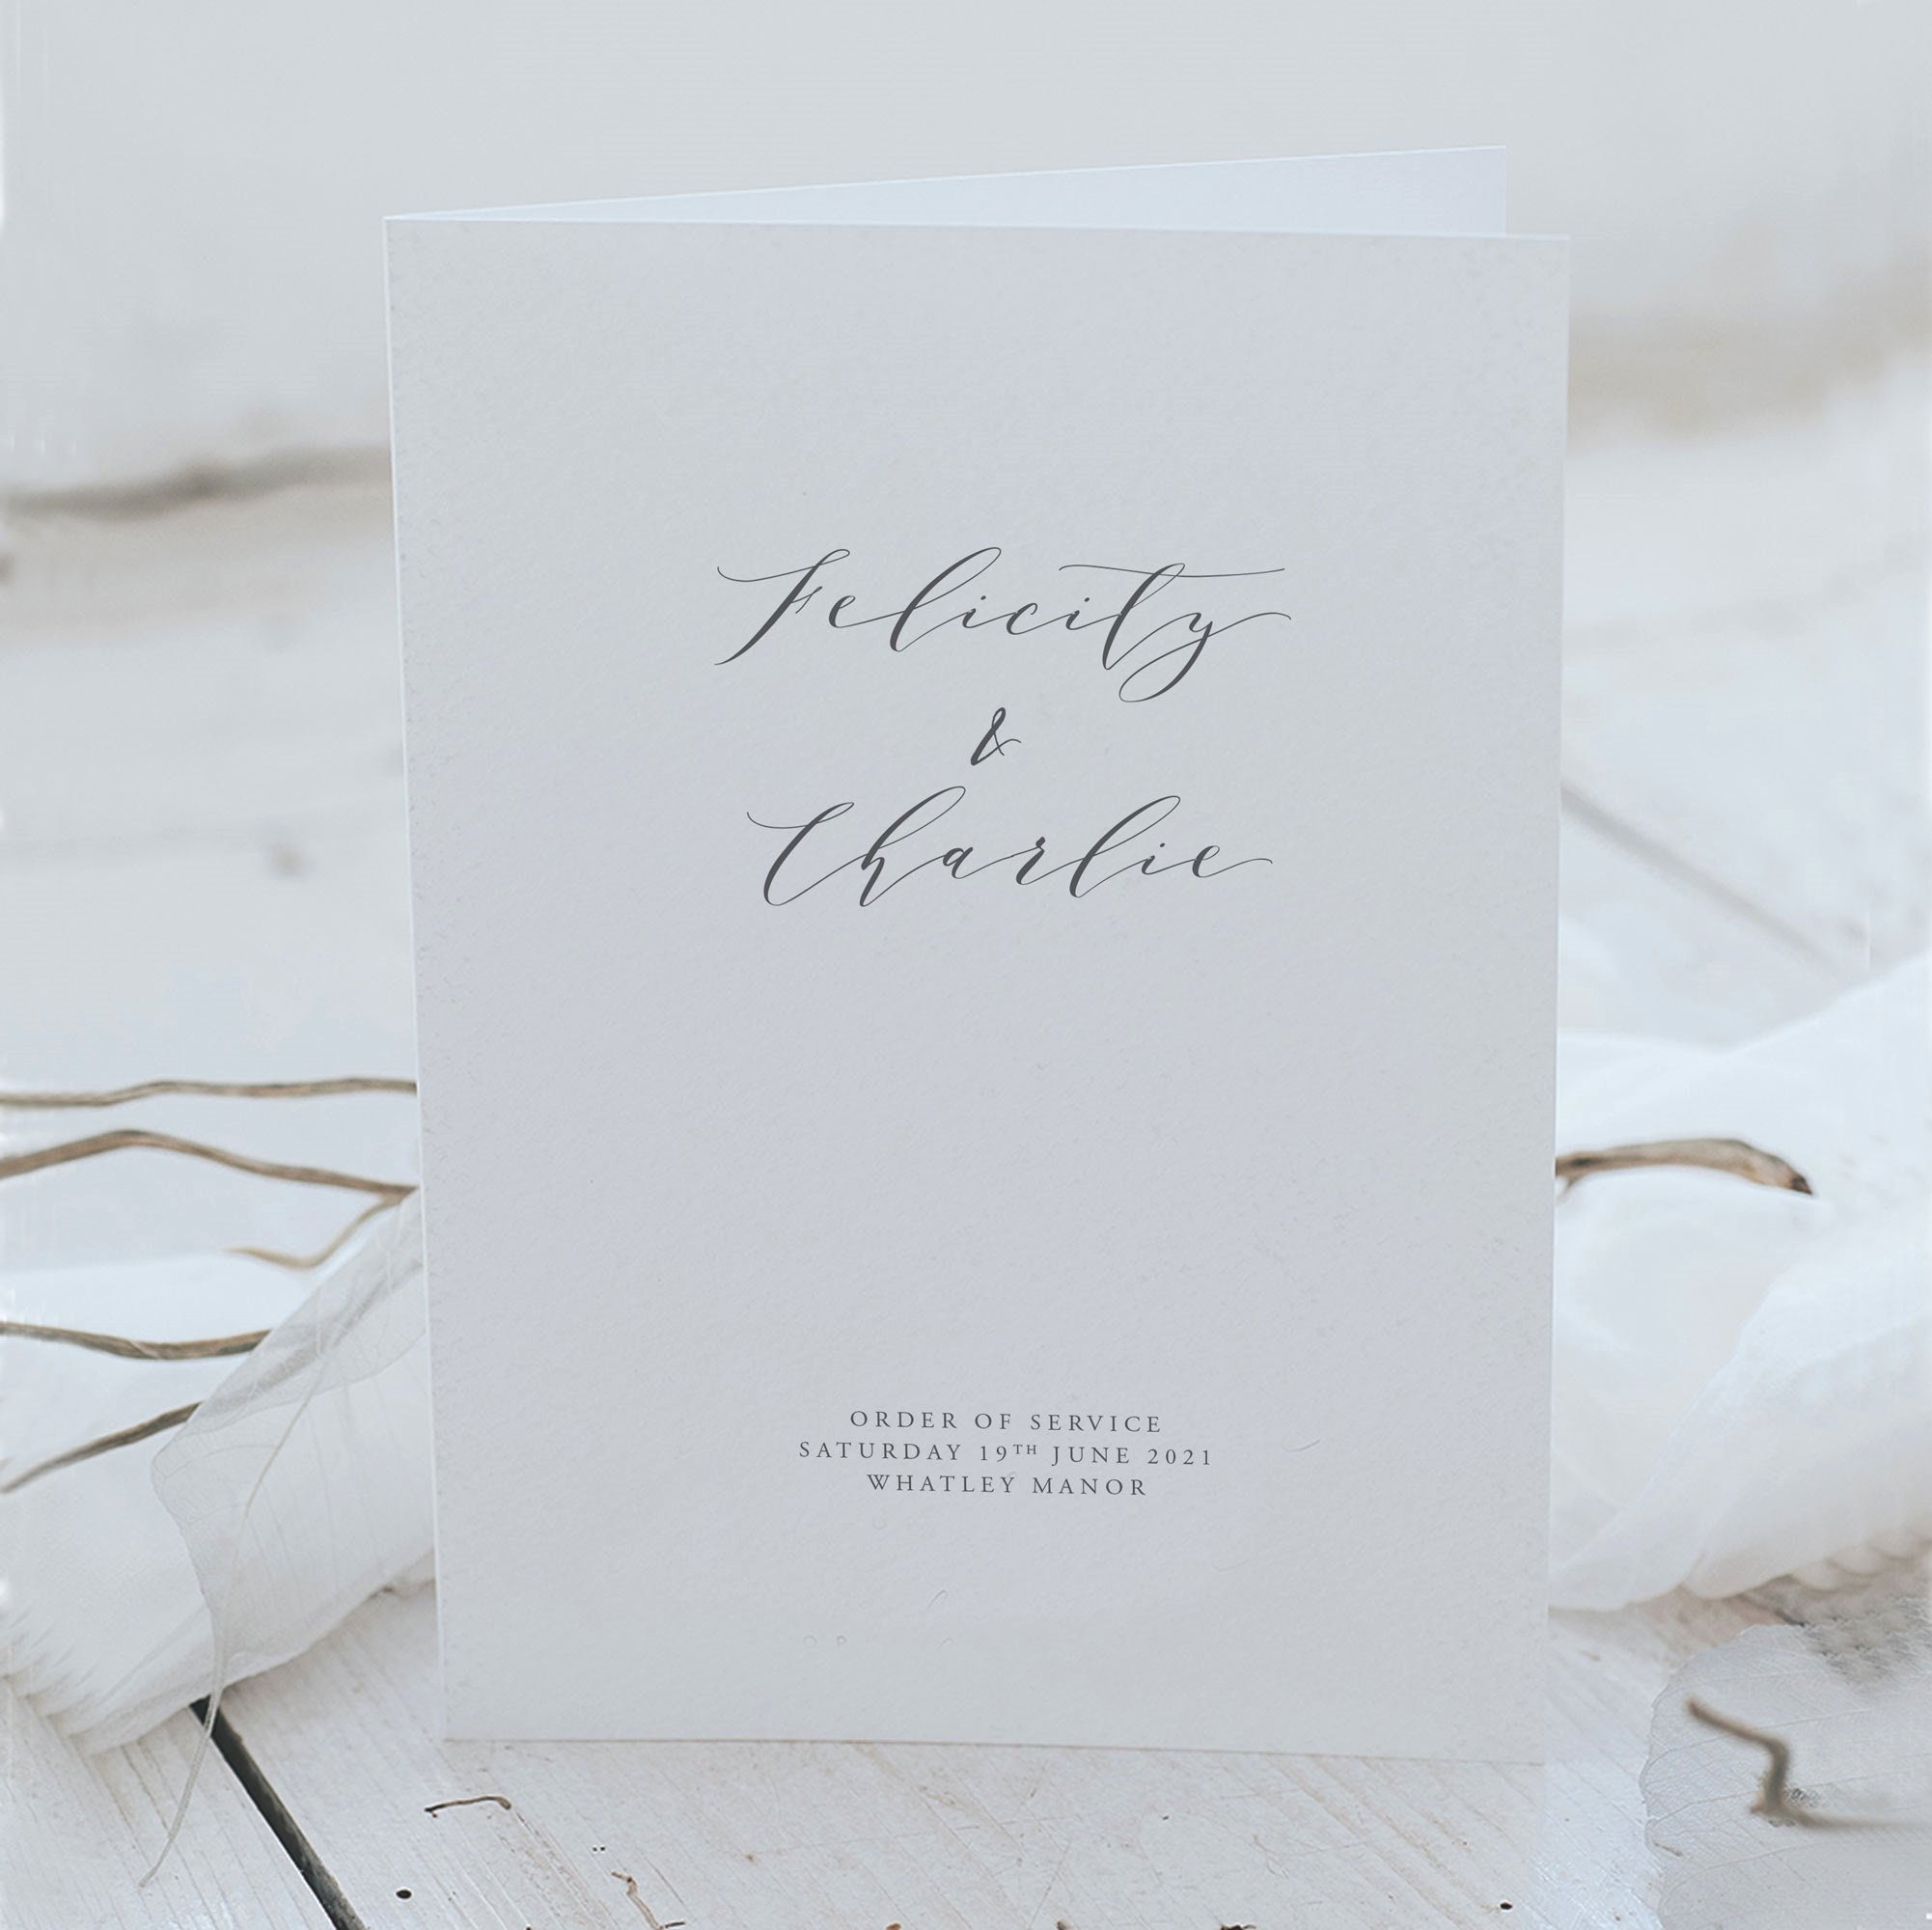 Printed Order Of Service With Beautiful Calligraphy Script & Classic Fonts - Wedding Booklet Ceremony Programme